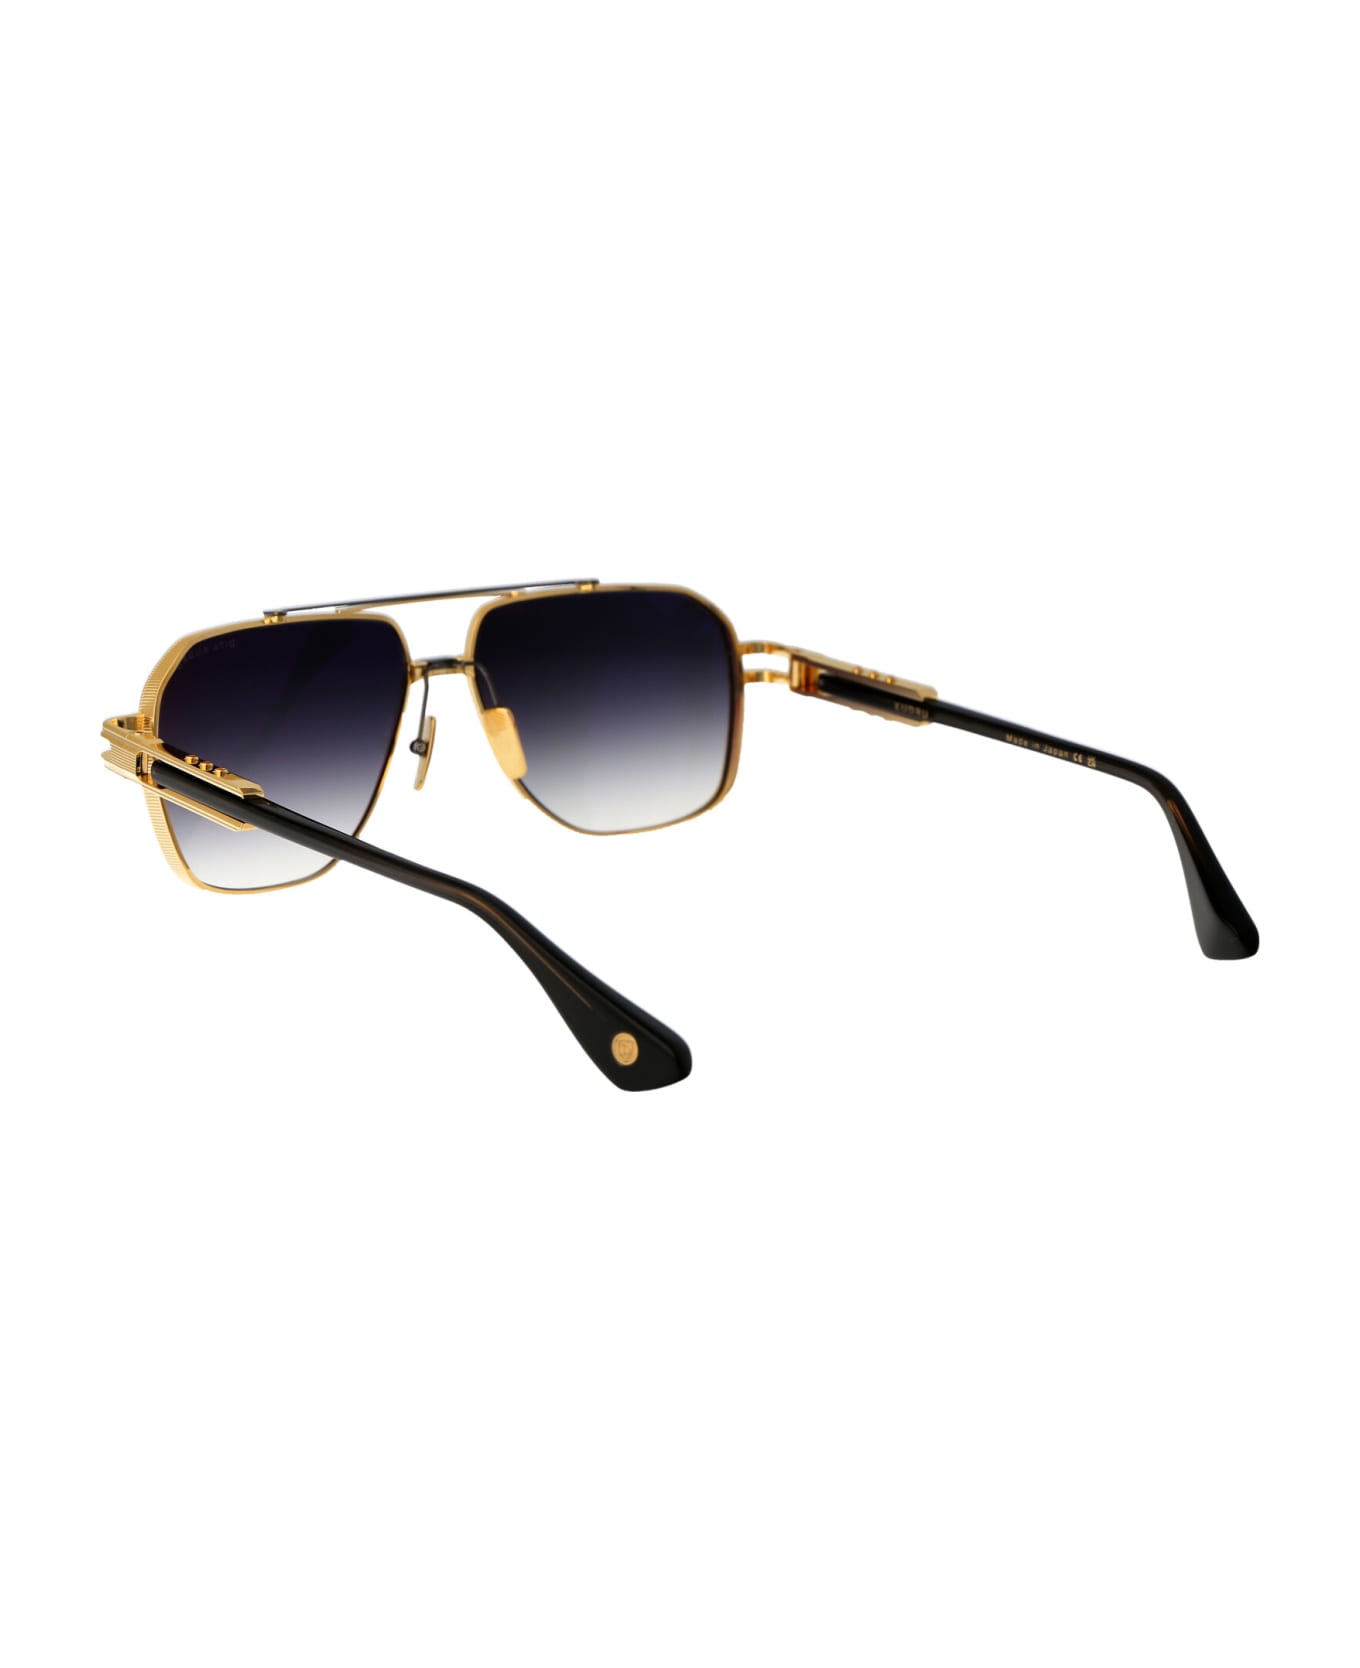 Dita Kudru Sunglasses - 01 YELLOW GOLD - ANTIQUE SILVER W/ GREY TO CLEAR GRADIENT サングラス